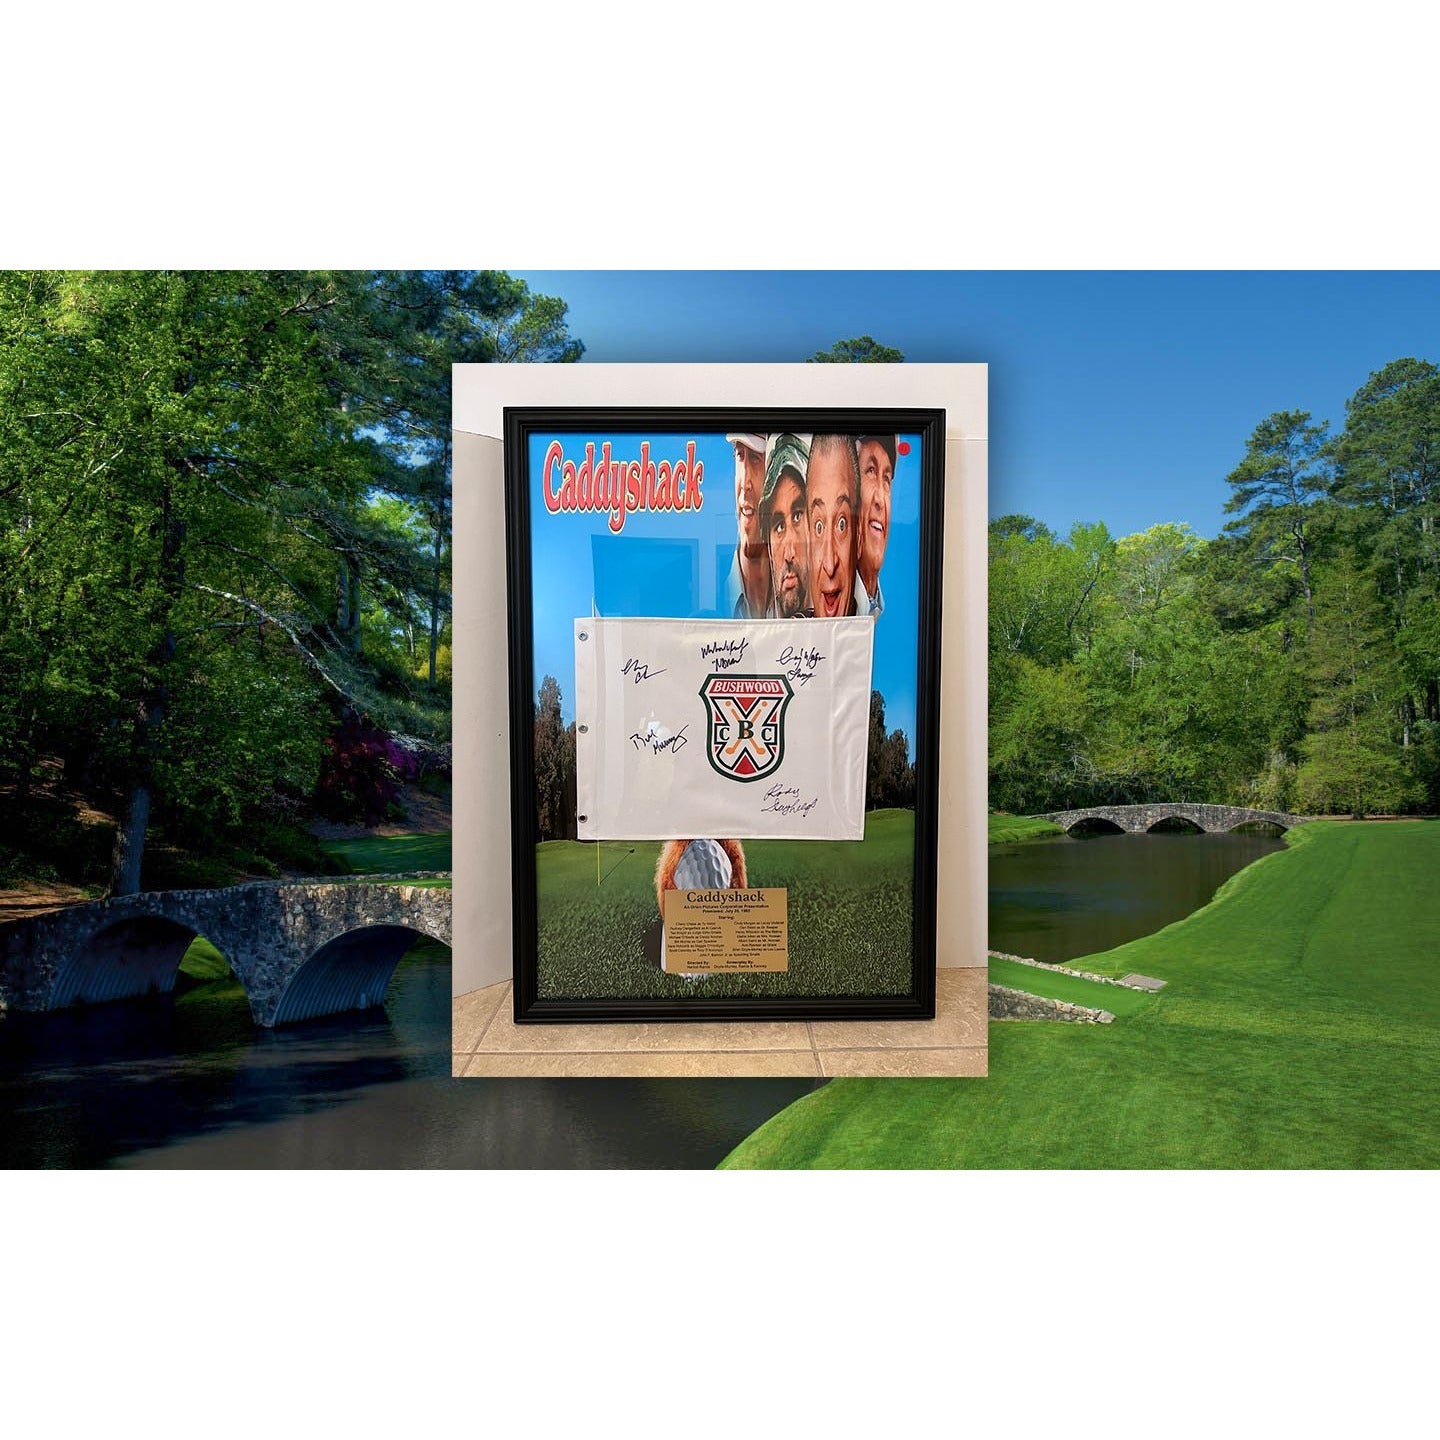 Caddyshack Bushwood Country Club Pin flag Bill Murray Rodney Dangerfield Chevy Chase cast signed with proof and framed 26x37